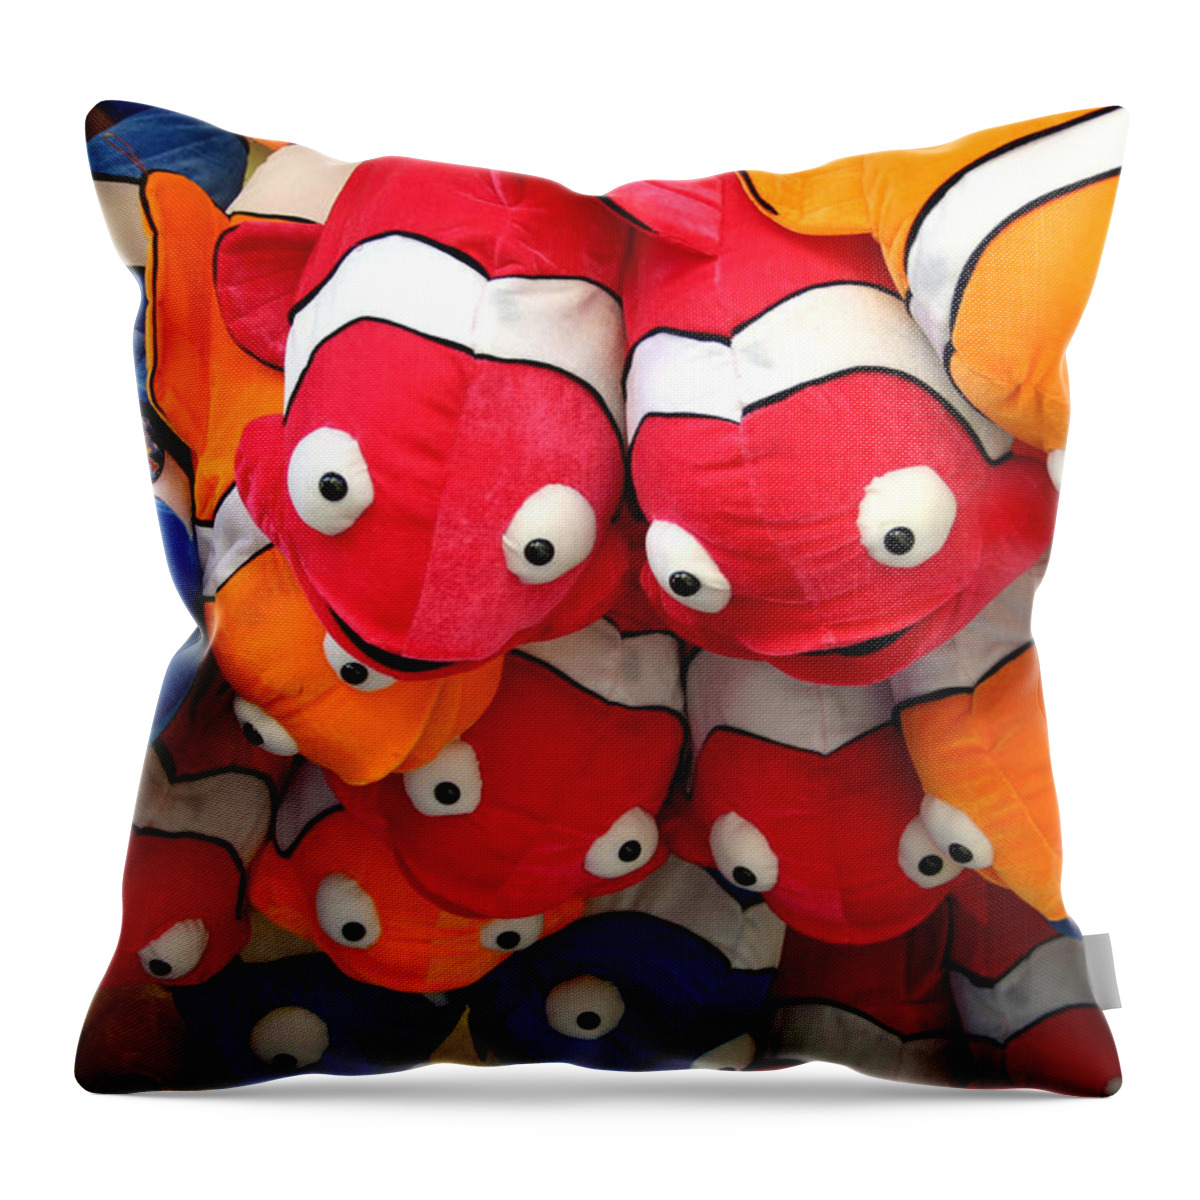 County Fair Throw Pillow featuring the photograph Fishies by Patty Colabuono